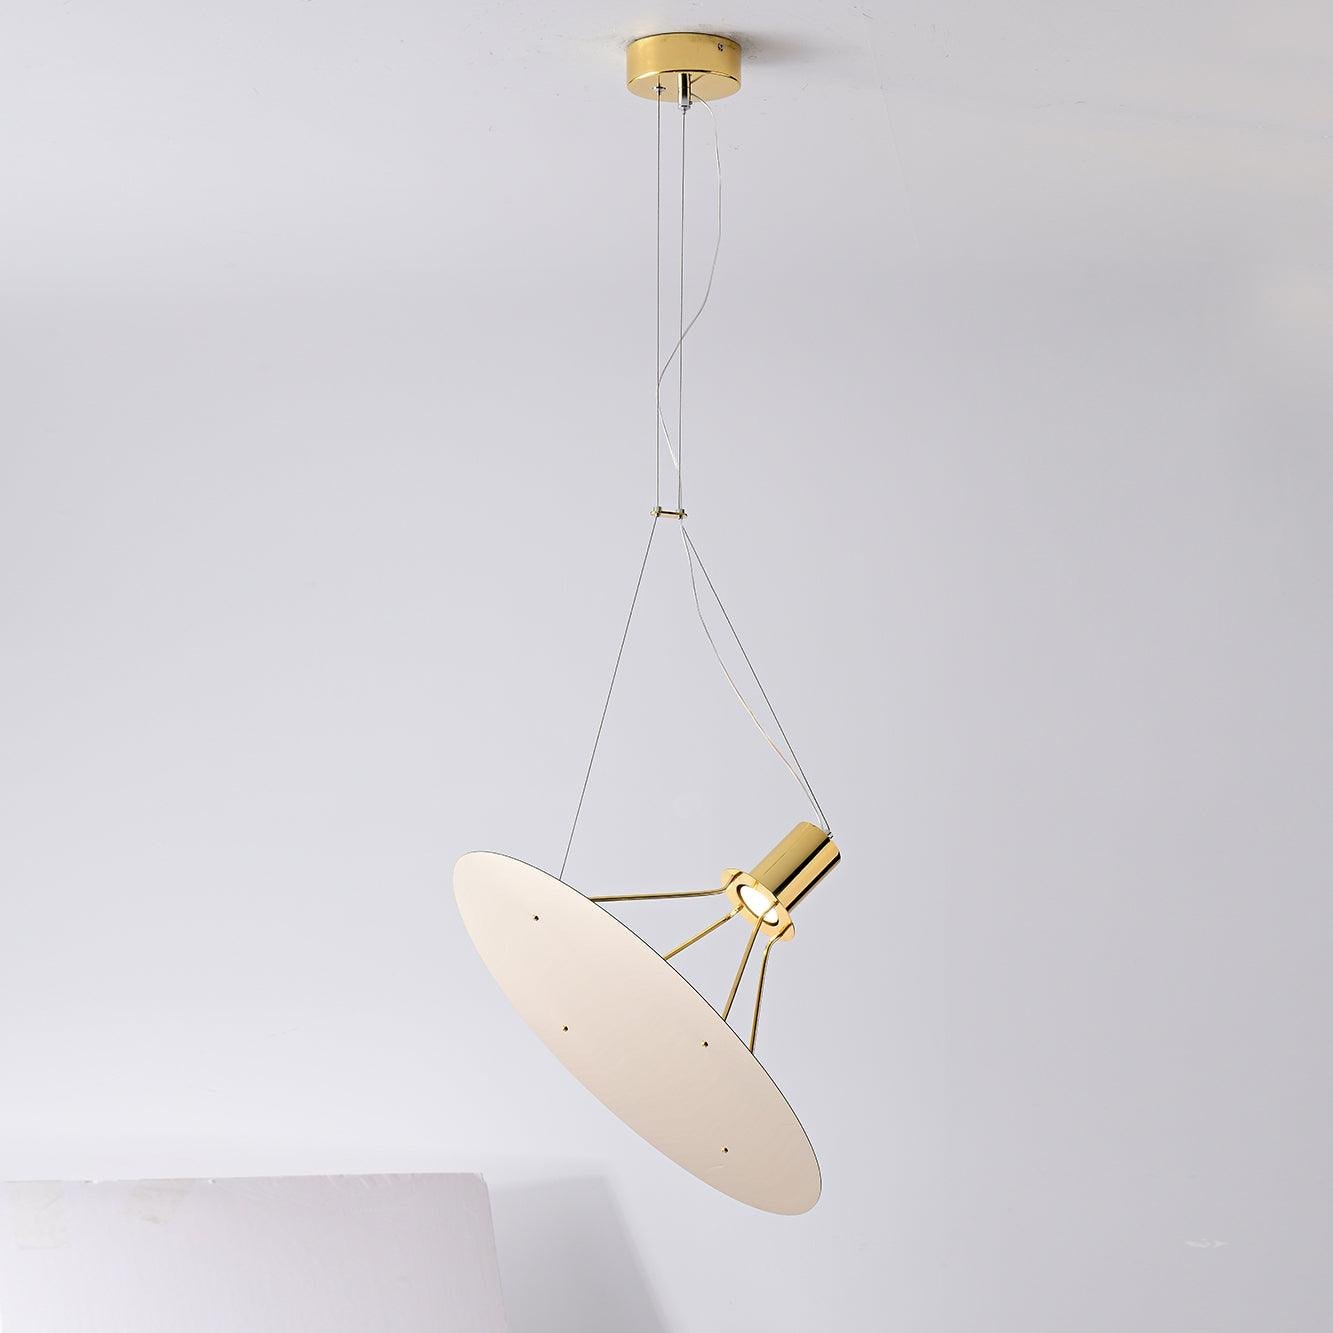 Gold Amisol Pendant Lamp with measurements of 31.5" x 15.7" (80cm in diameter and 40cm in height) and featuring Cool White illumination.